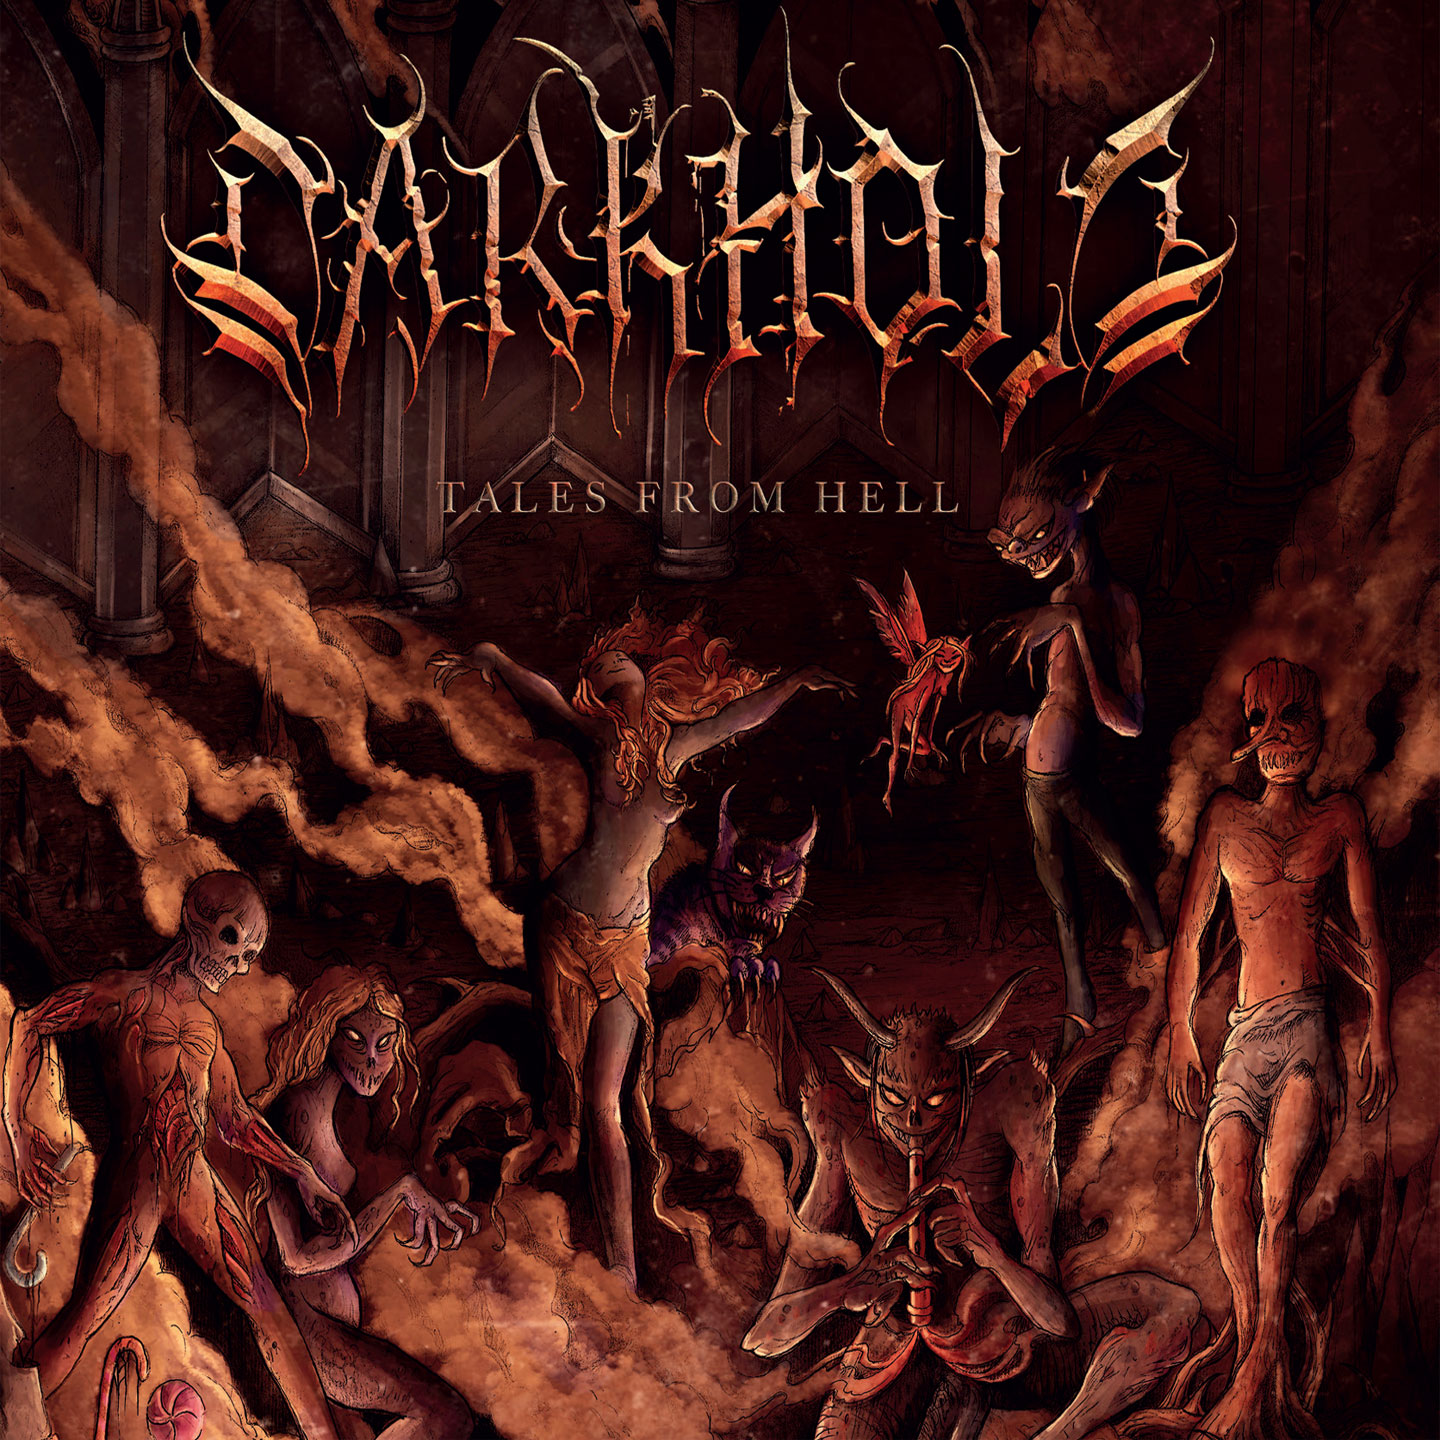 Darkhold – “Tales From Hell”